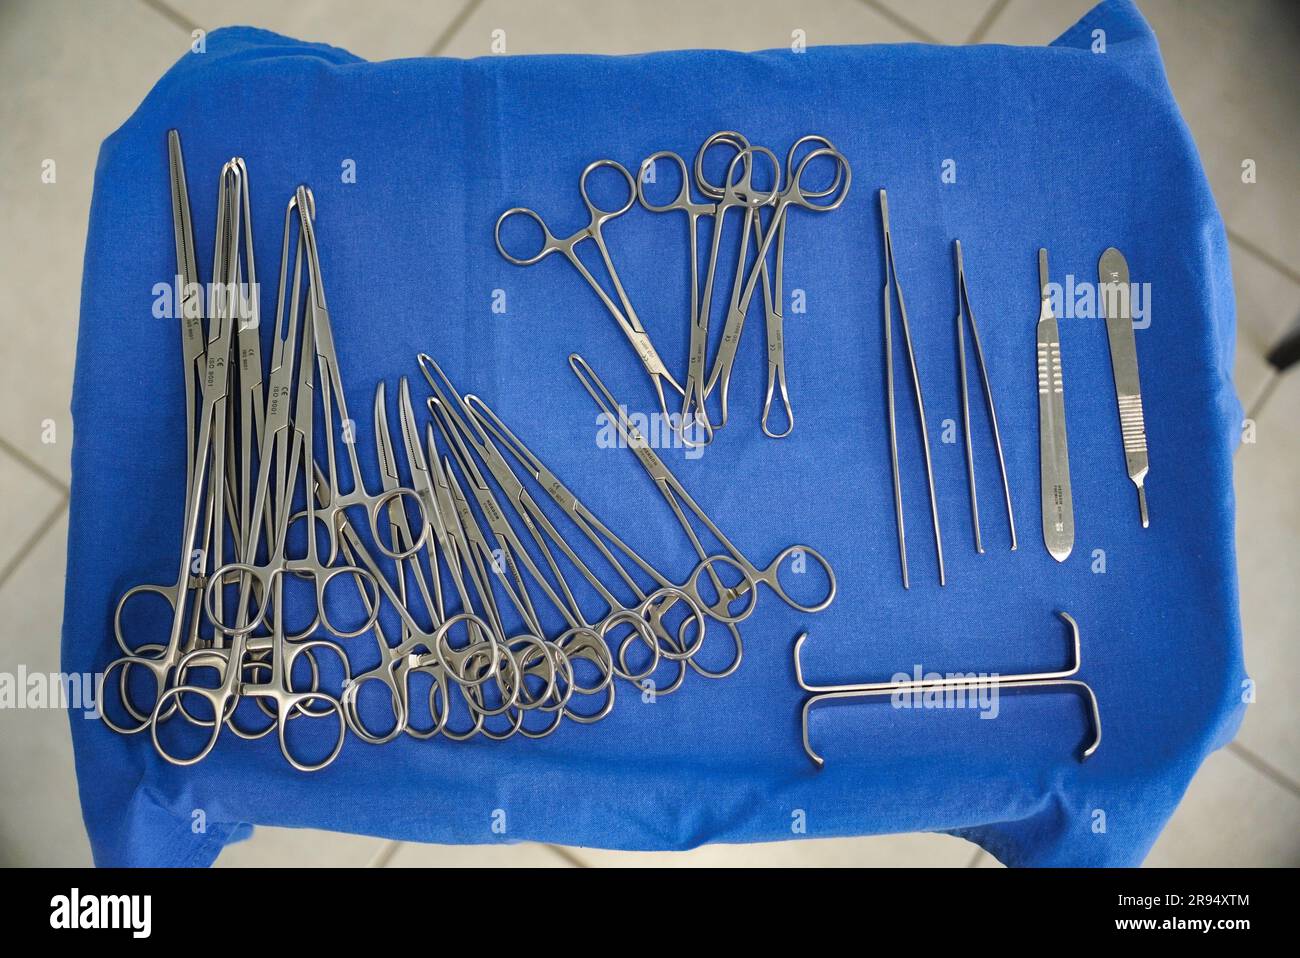 Extraction forceps hi-res stock photography and images - Alamy